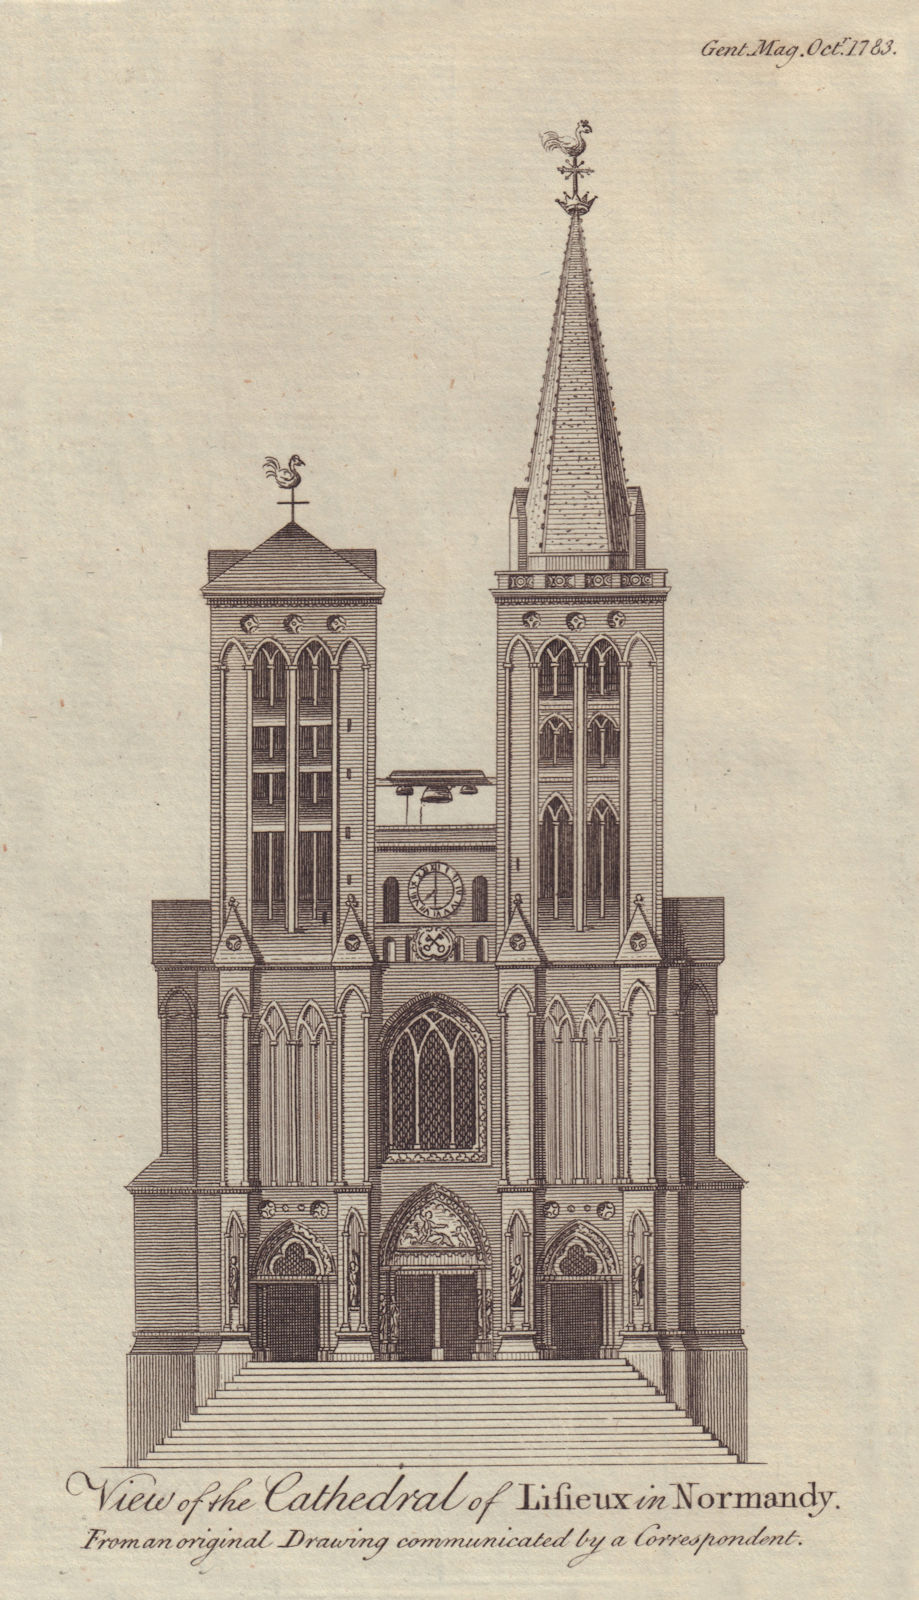 Associate Product View of the Cathedral of Lisieux in Normandy. Calvados. GENTS MAG 1783 print